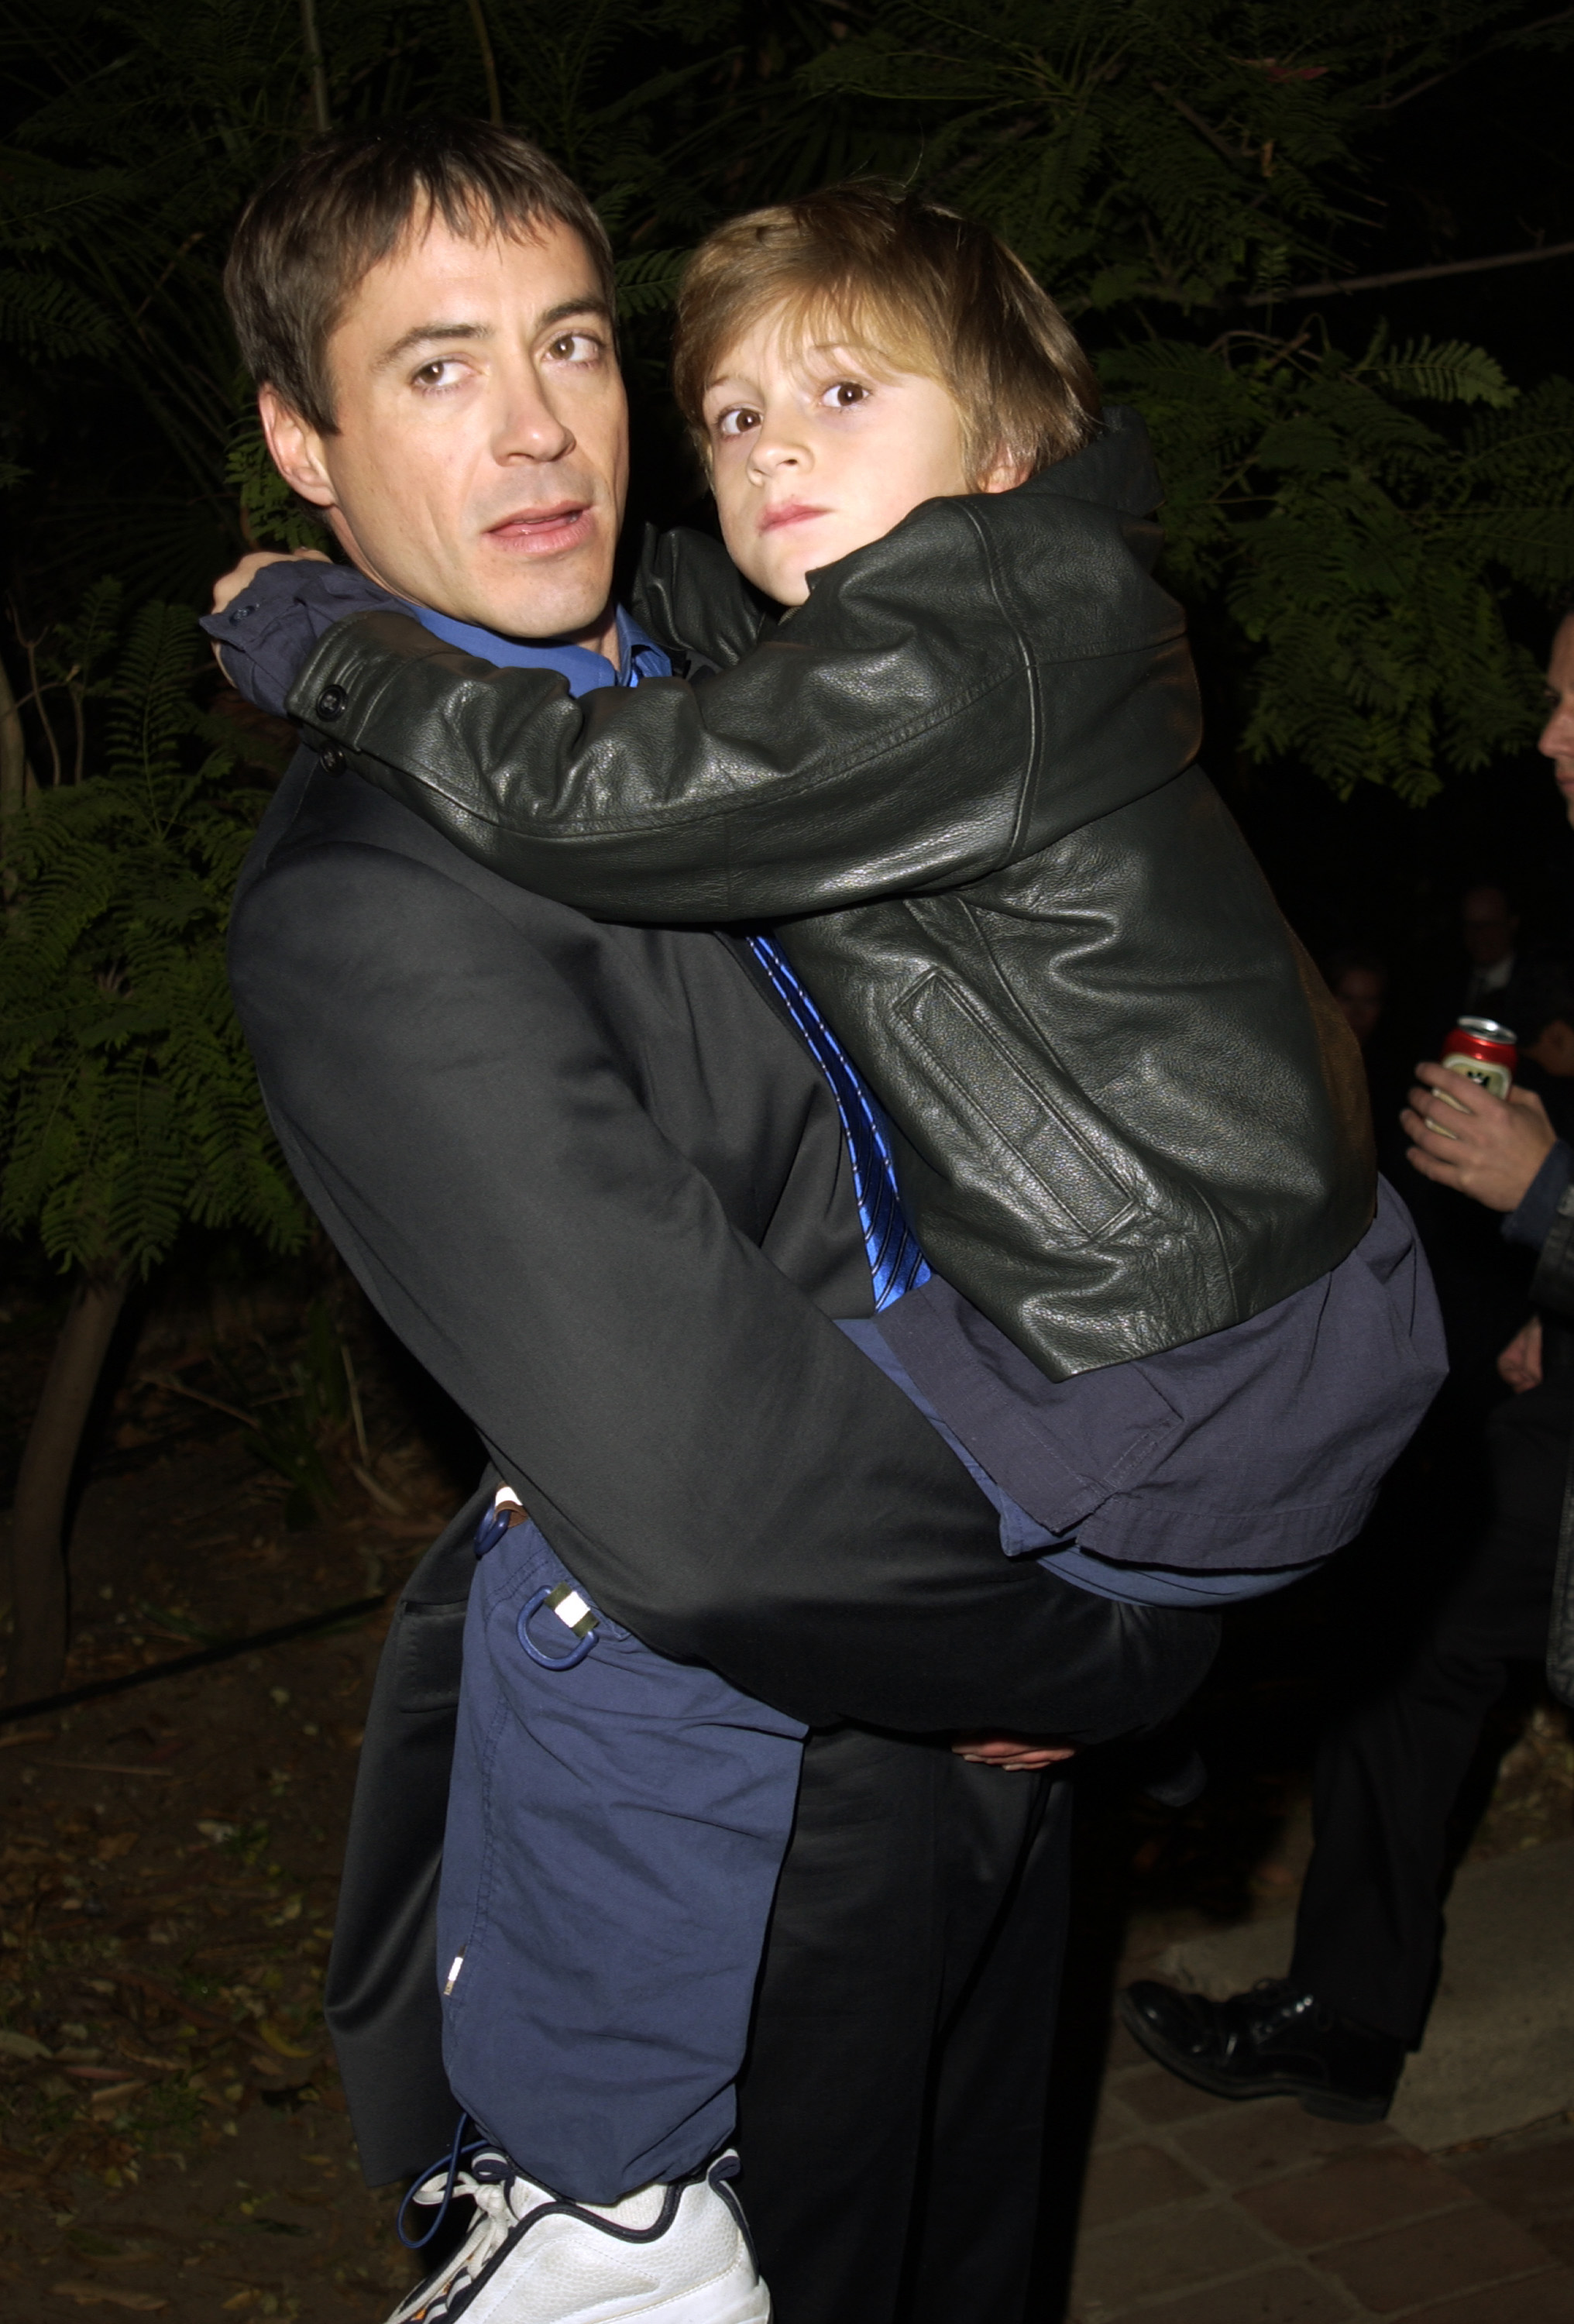 <p>Robert Downey Jr. gave then-8-year-old son Indio Falconer Downey a lift as they attended the Silver Lining Benefit for The Hollywood Sunset Free Clinic in Los Angeles on Dec. 13, 2001. Indio's mom is RDJ's first wife, singer-actress Deborah Falconer. Keep reading to see Indio at 29...</p>